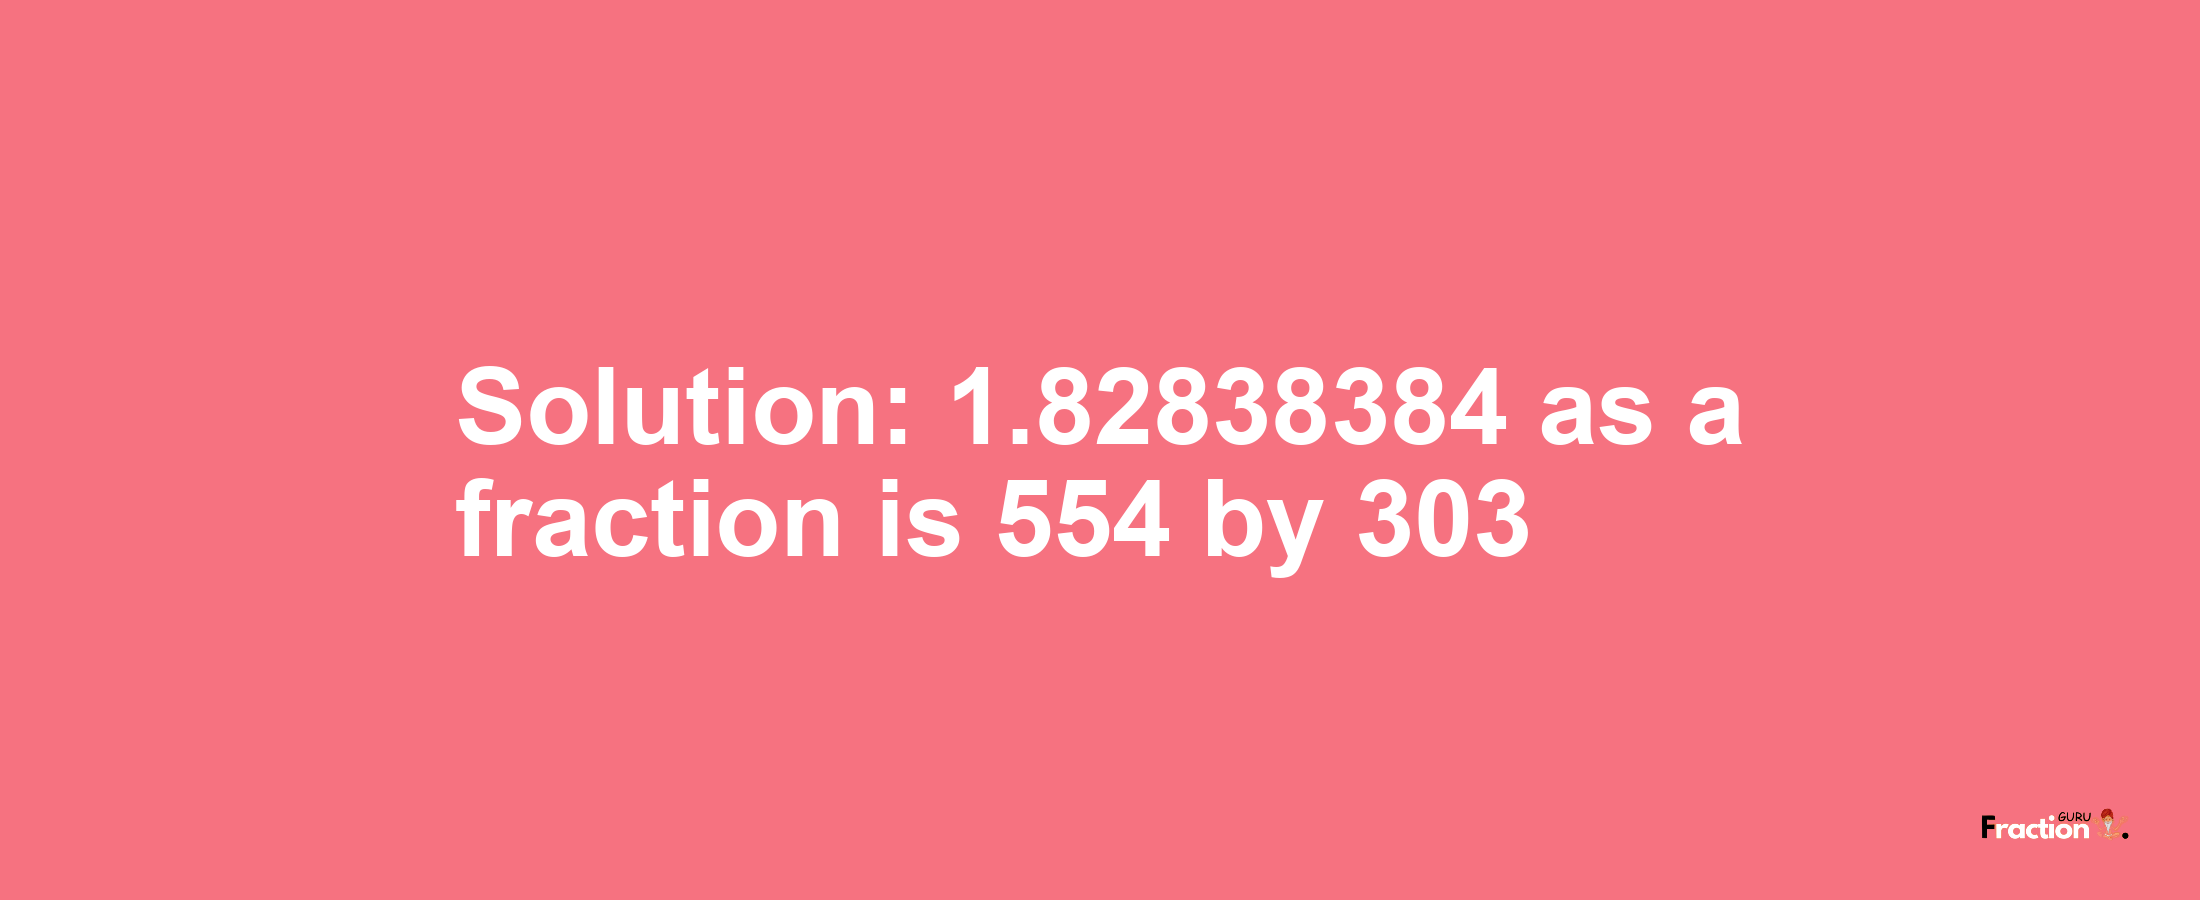 Solution:1.82838384 as a fraction is 554/303